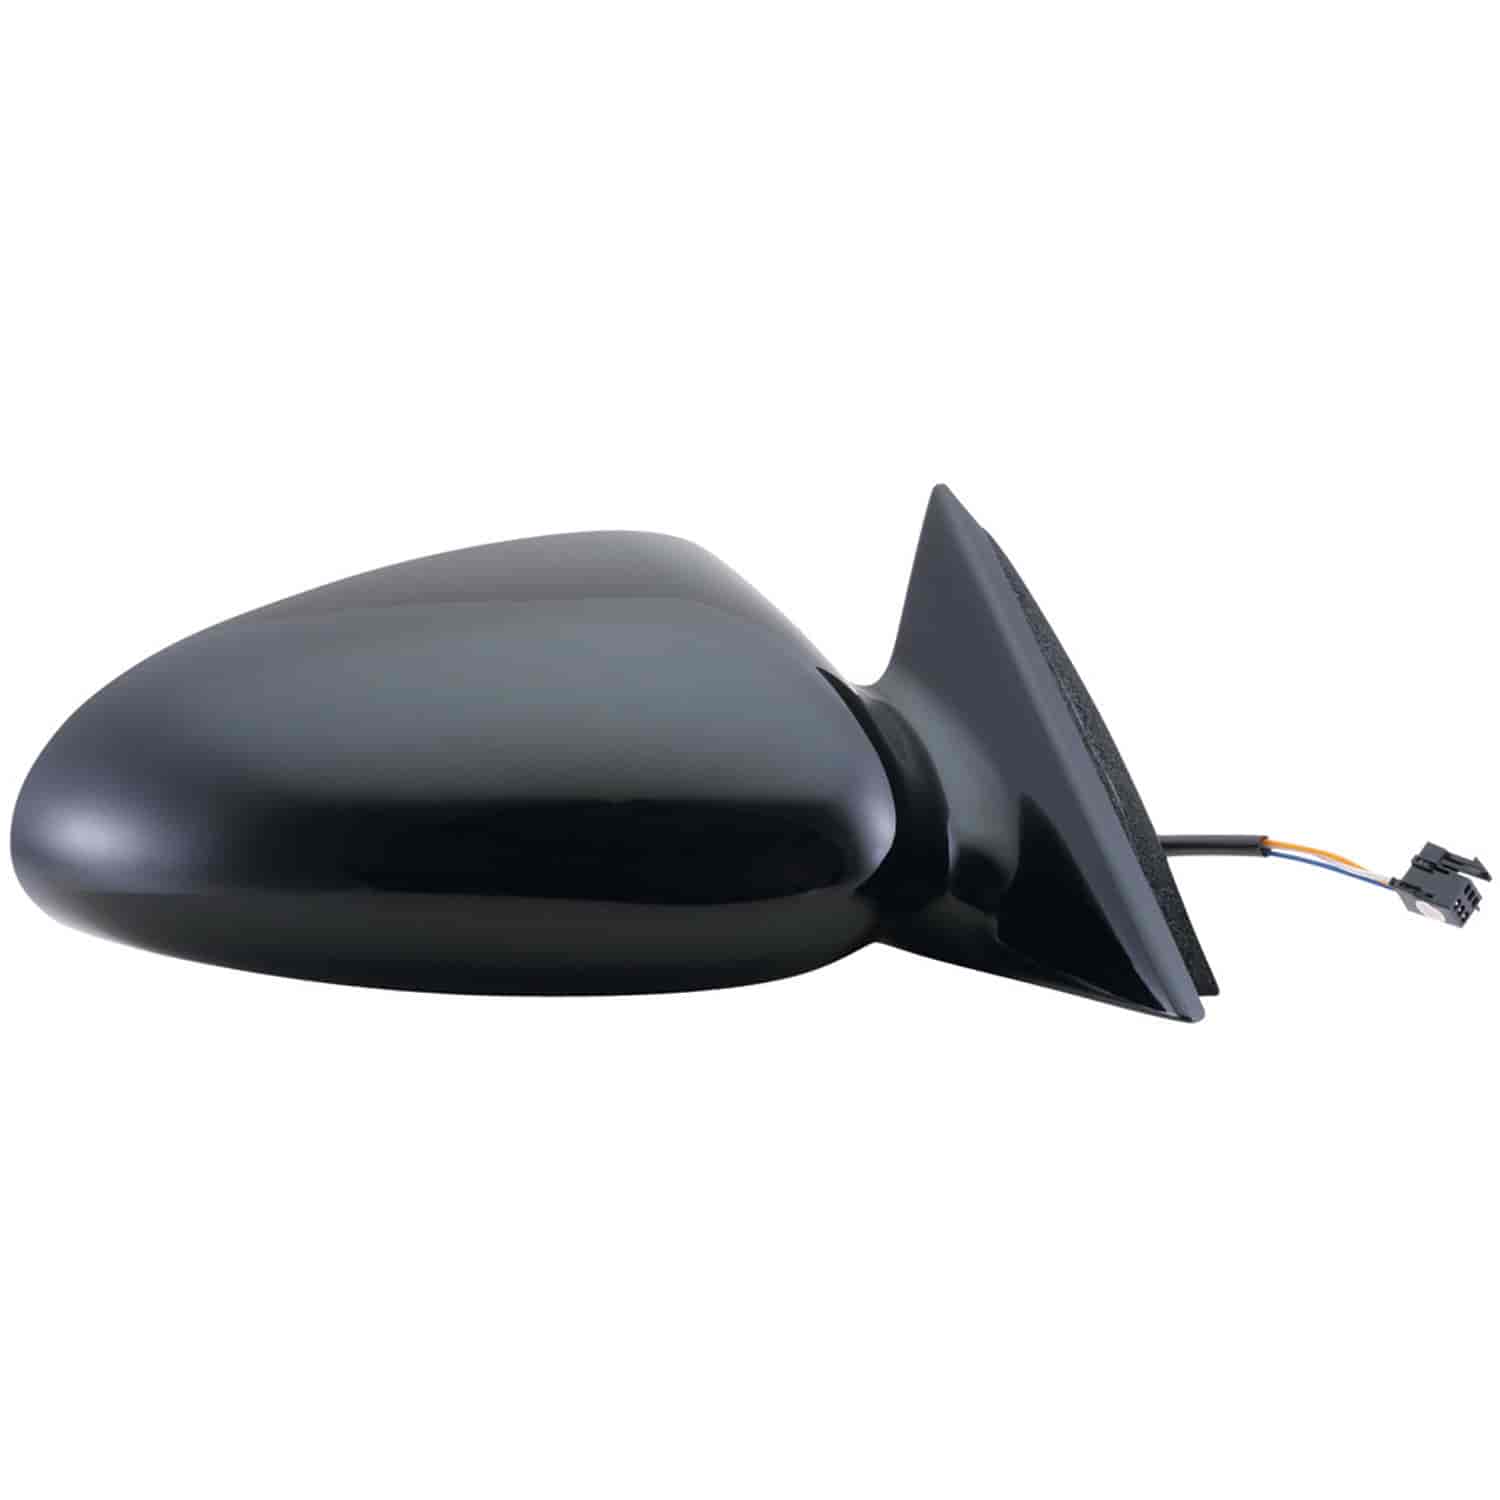 OEM Style Replacement mirror for 00-05 Chevrolet Monte Carlo passenger side mirror tested to fit and